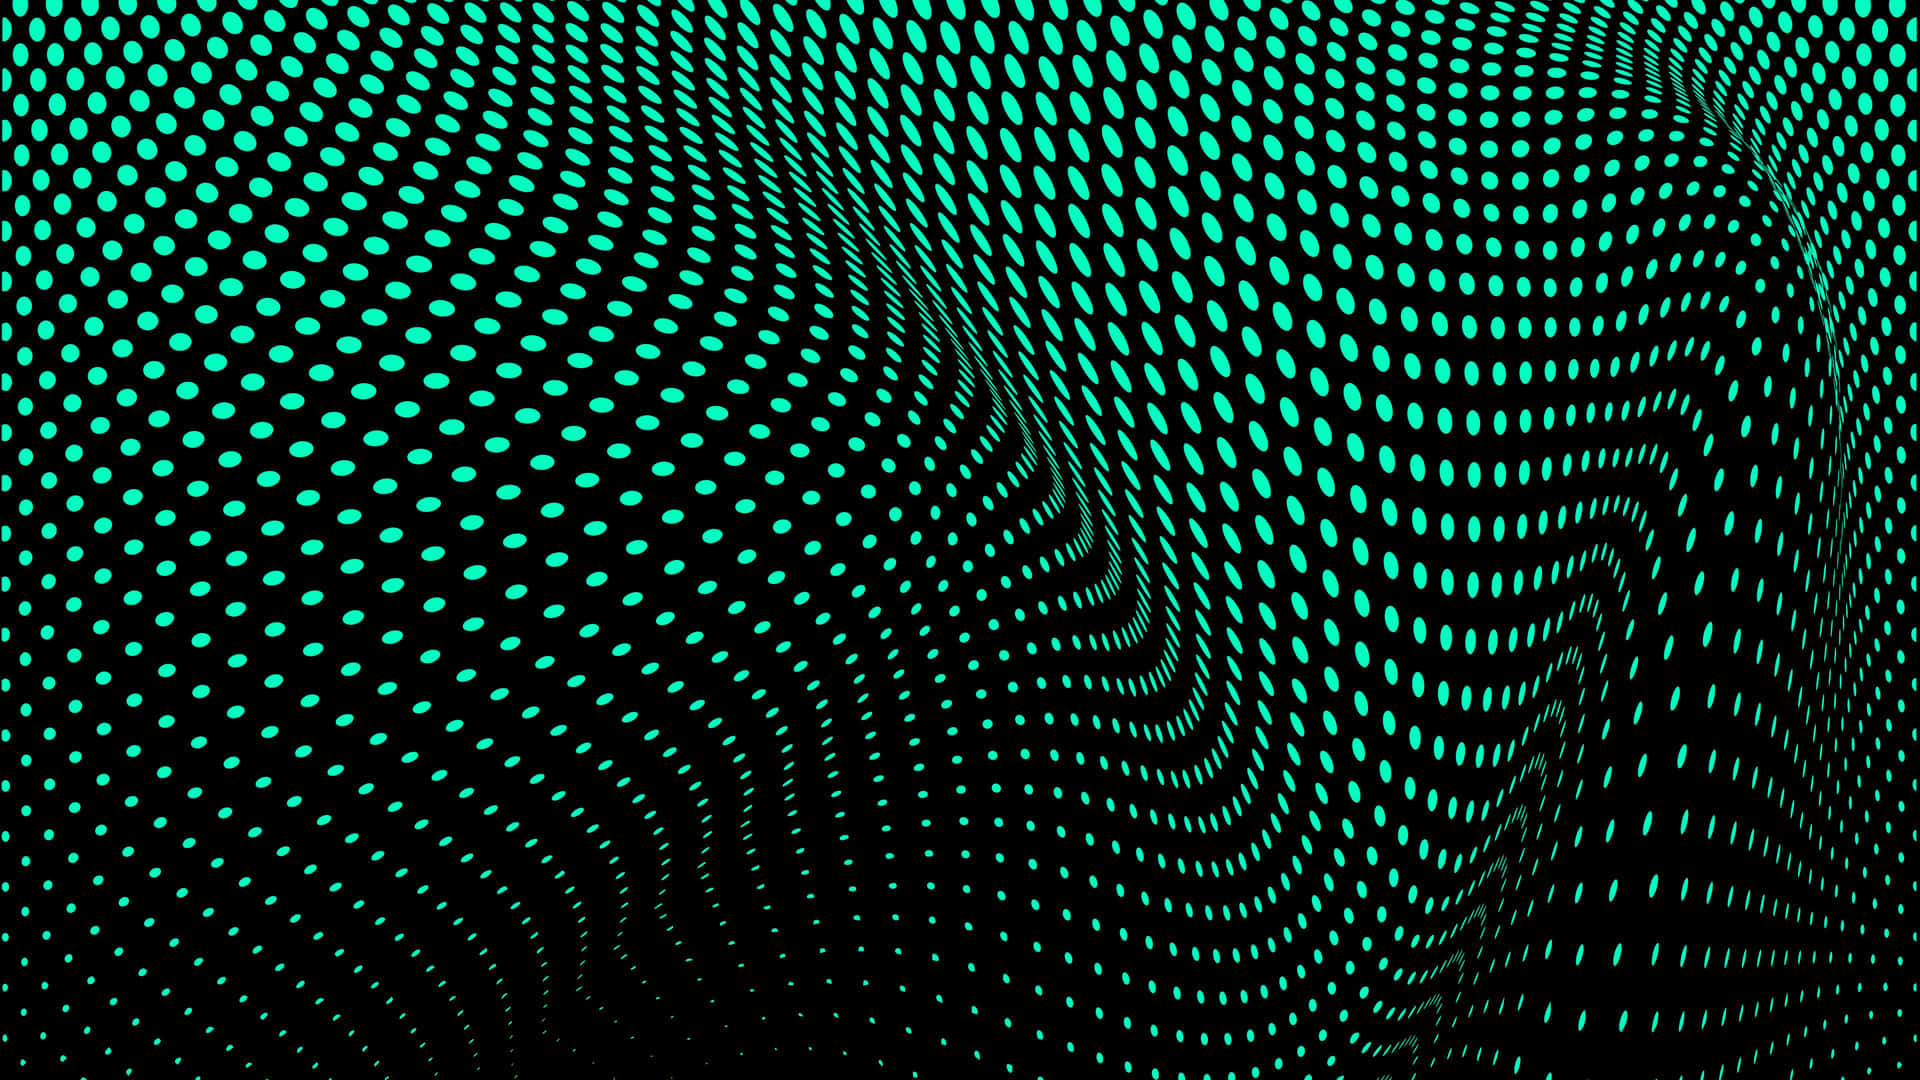 Glowing Dots on a Green and Black Background